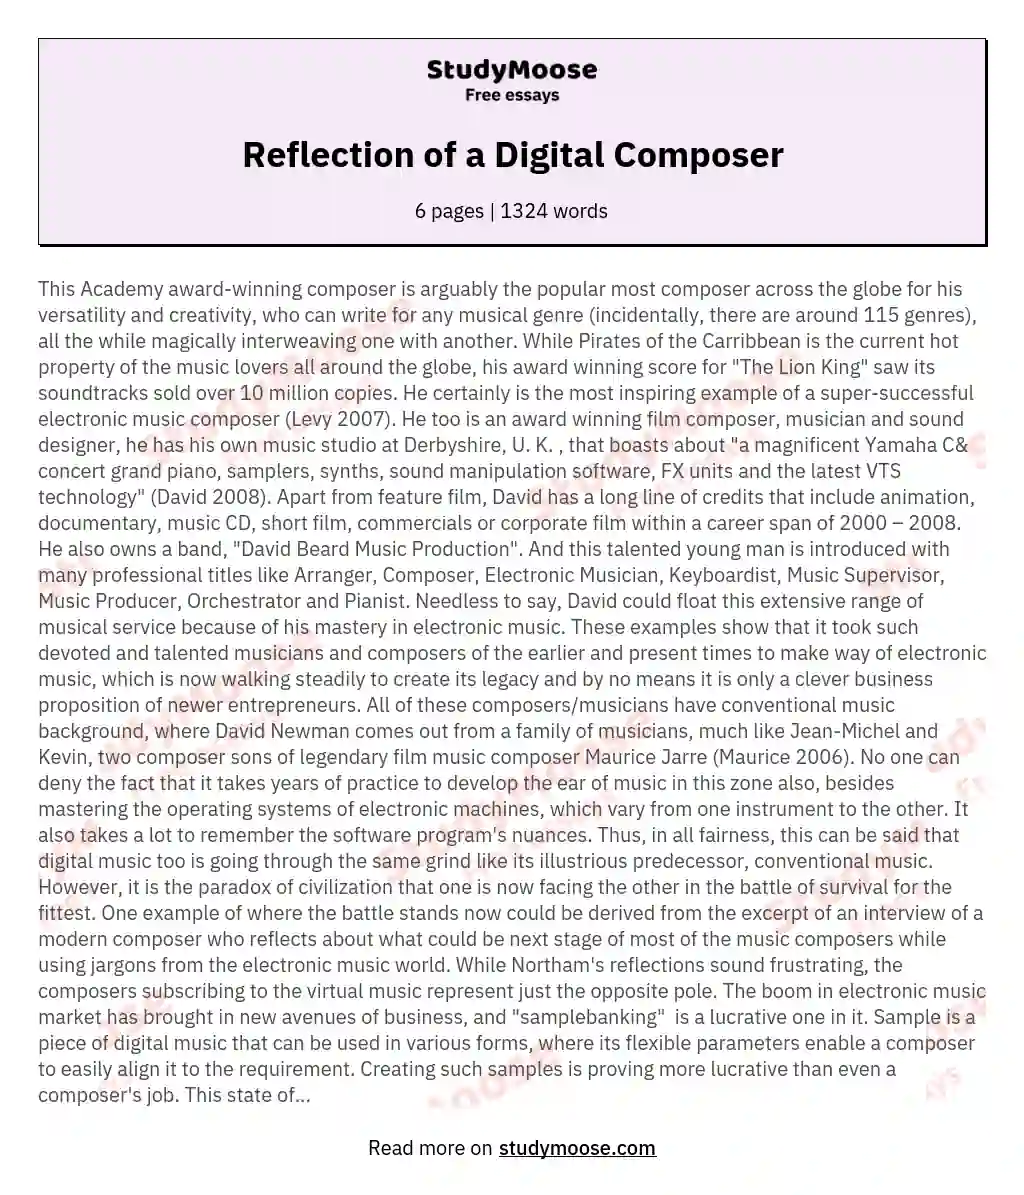 Reflection of a Digital Composer